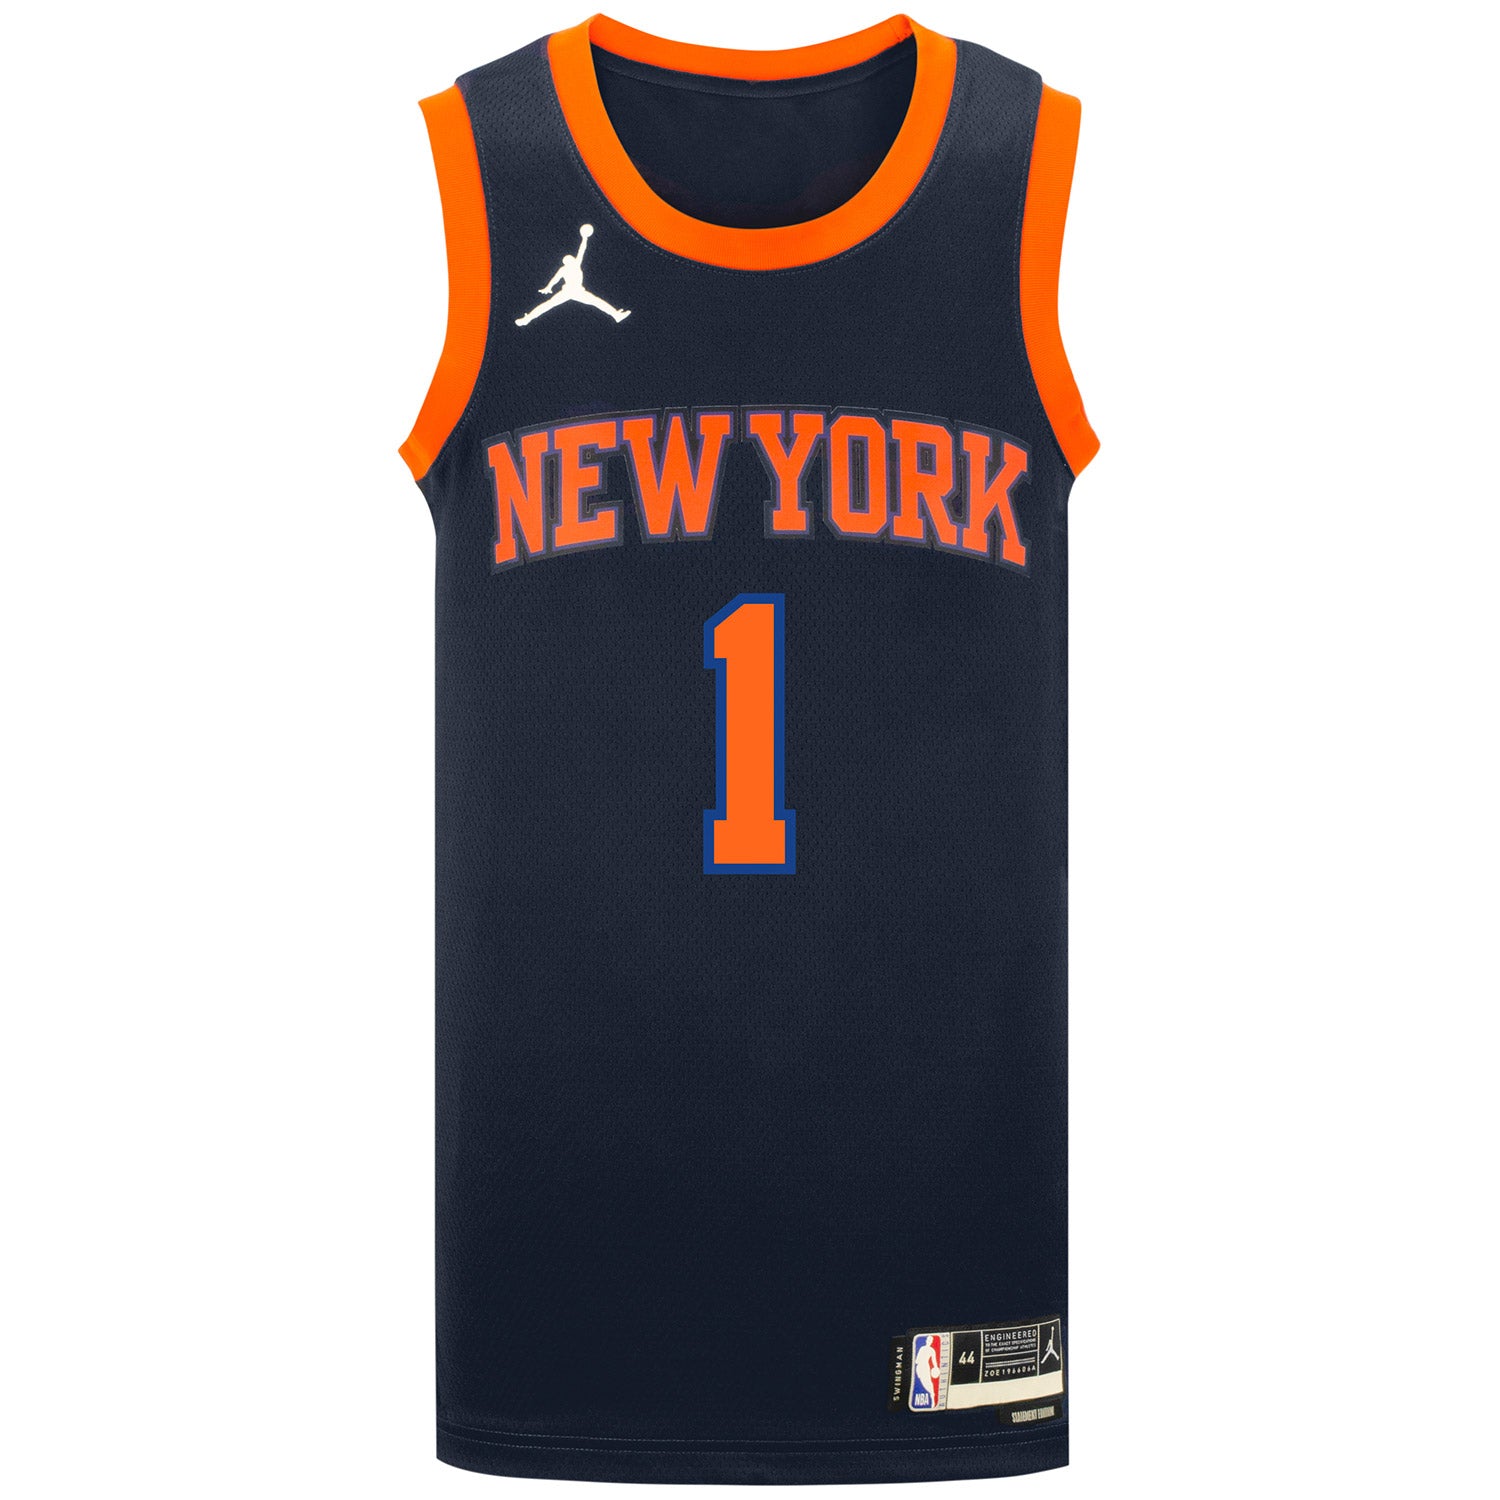 New York Knicks - Statement uniforms but with an added touch 👀